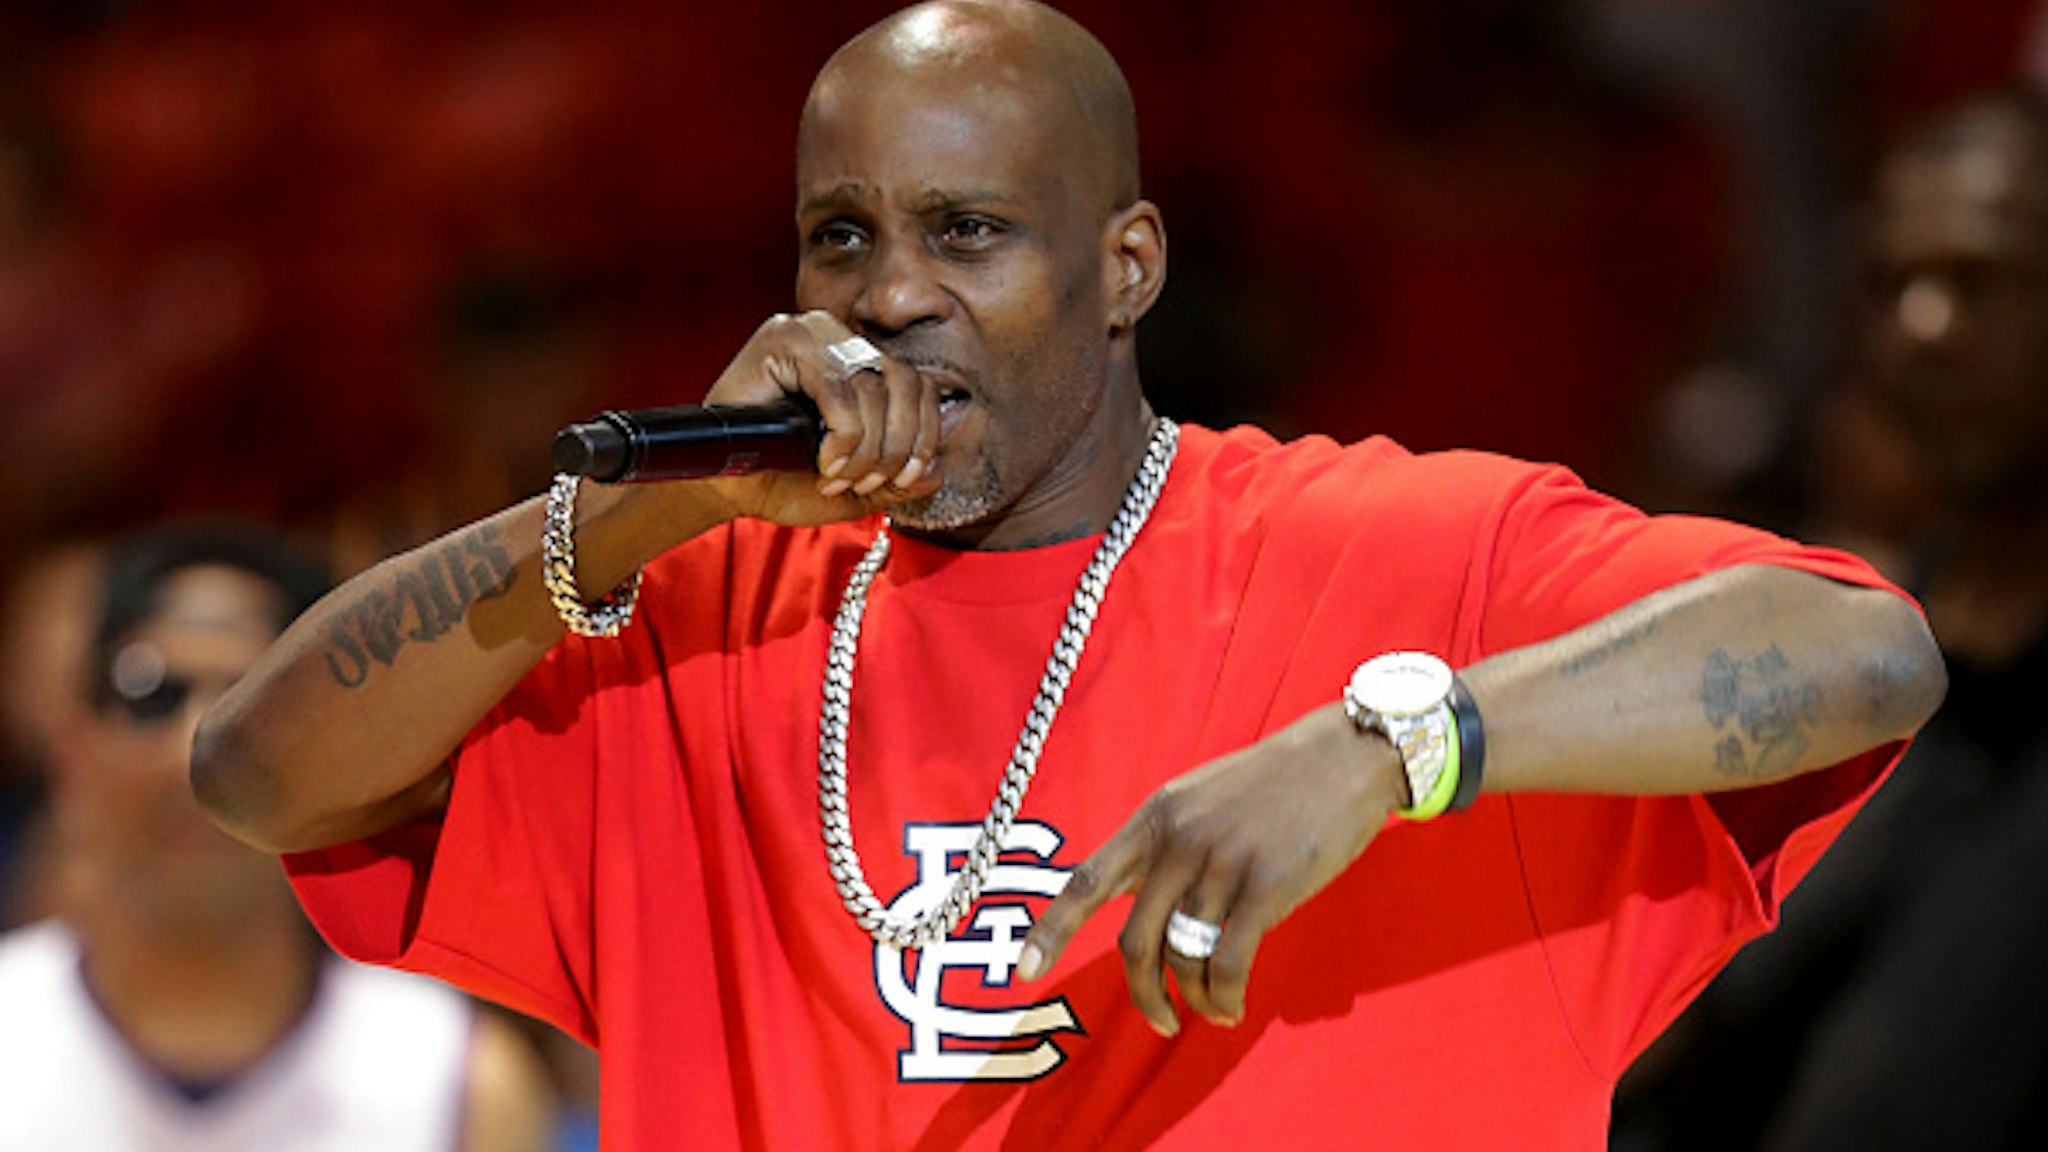 CHICAGO, IL - JULY 23: Rapper DMX performs during week five of the BIG3 three on three basketball league at UIC Pavilion on July 23, 2017 in Chicago, Illinois.